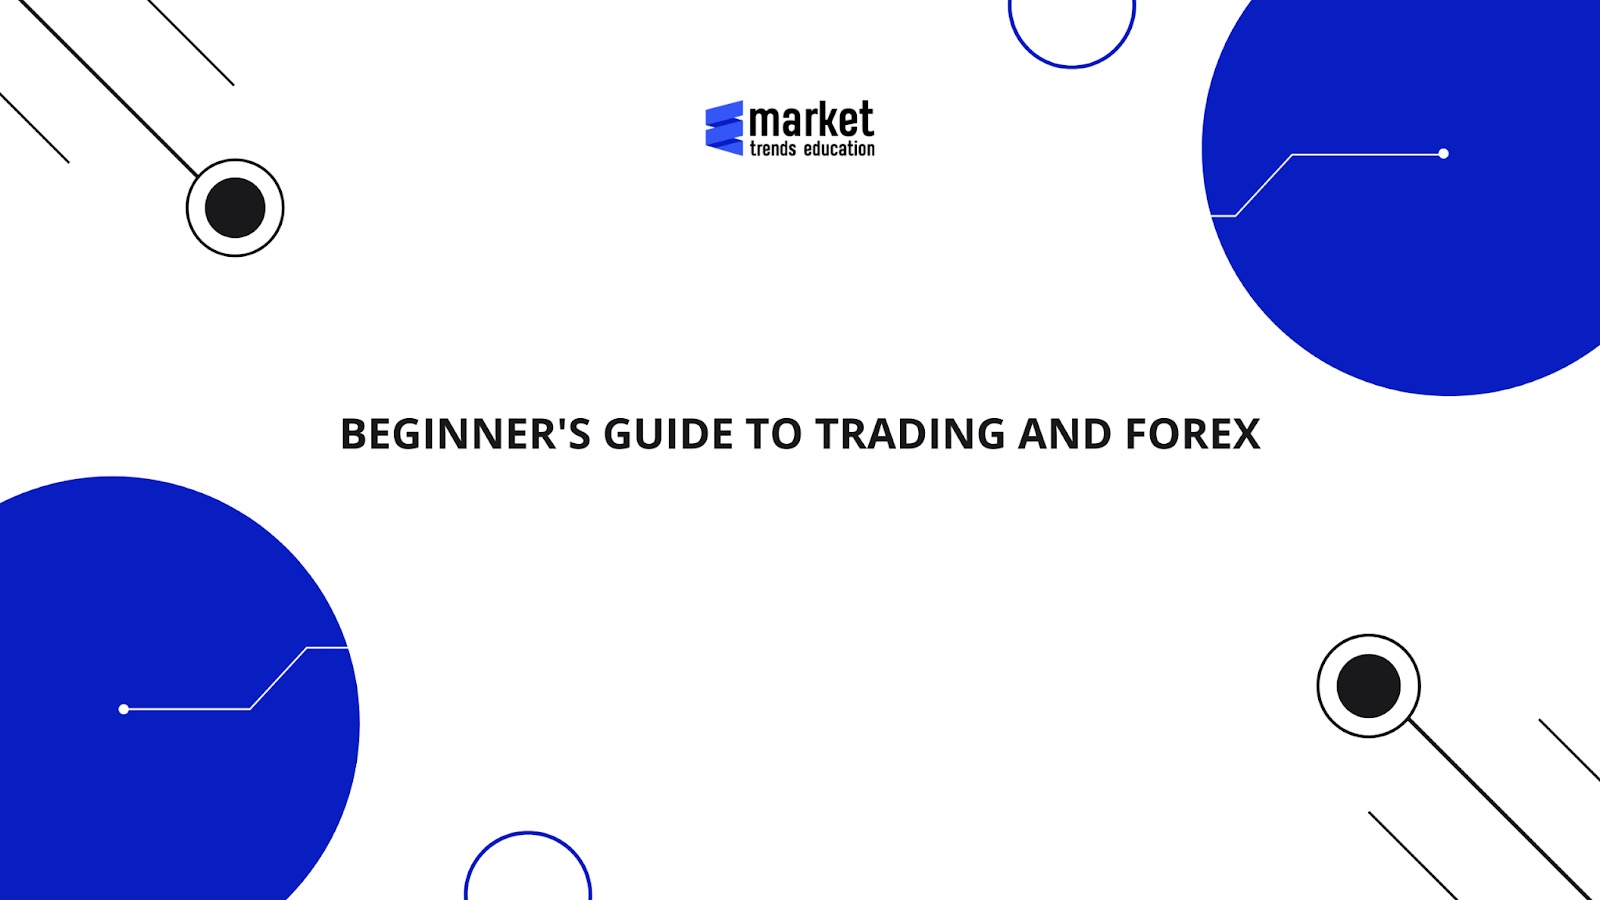 Beginner's Guide to Trading and Forex